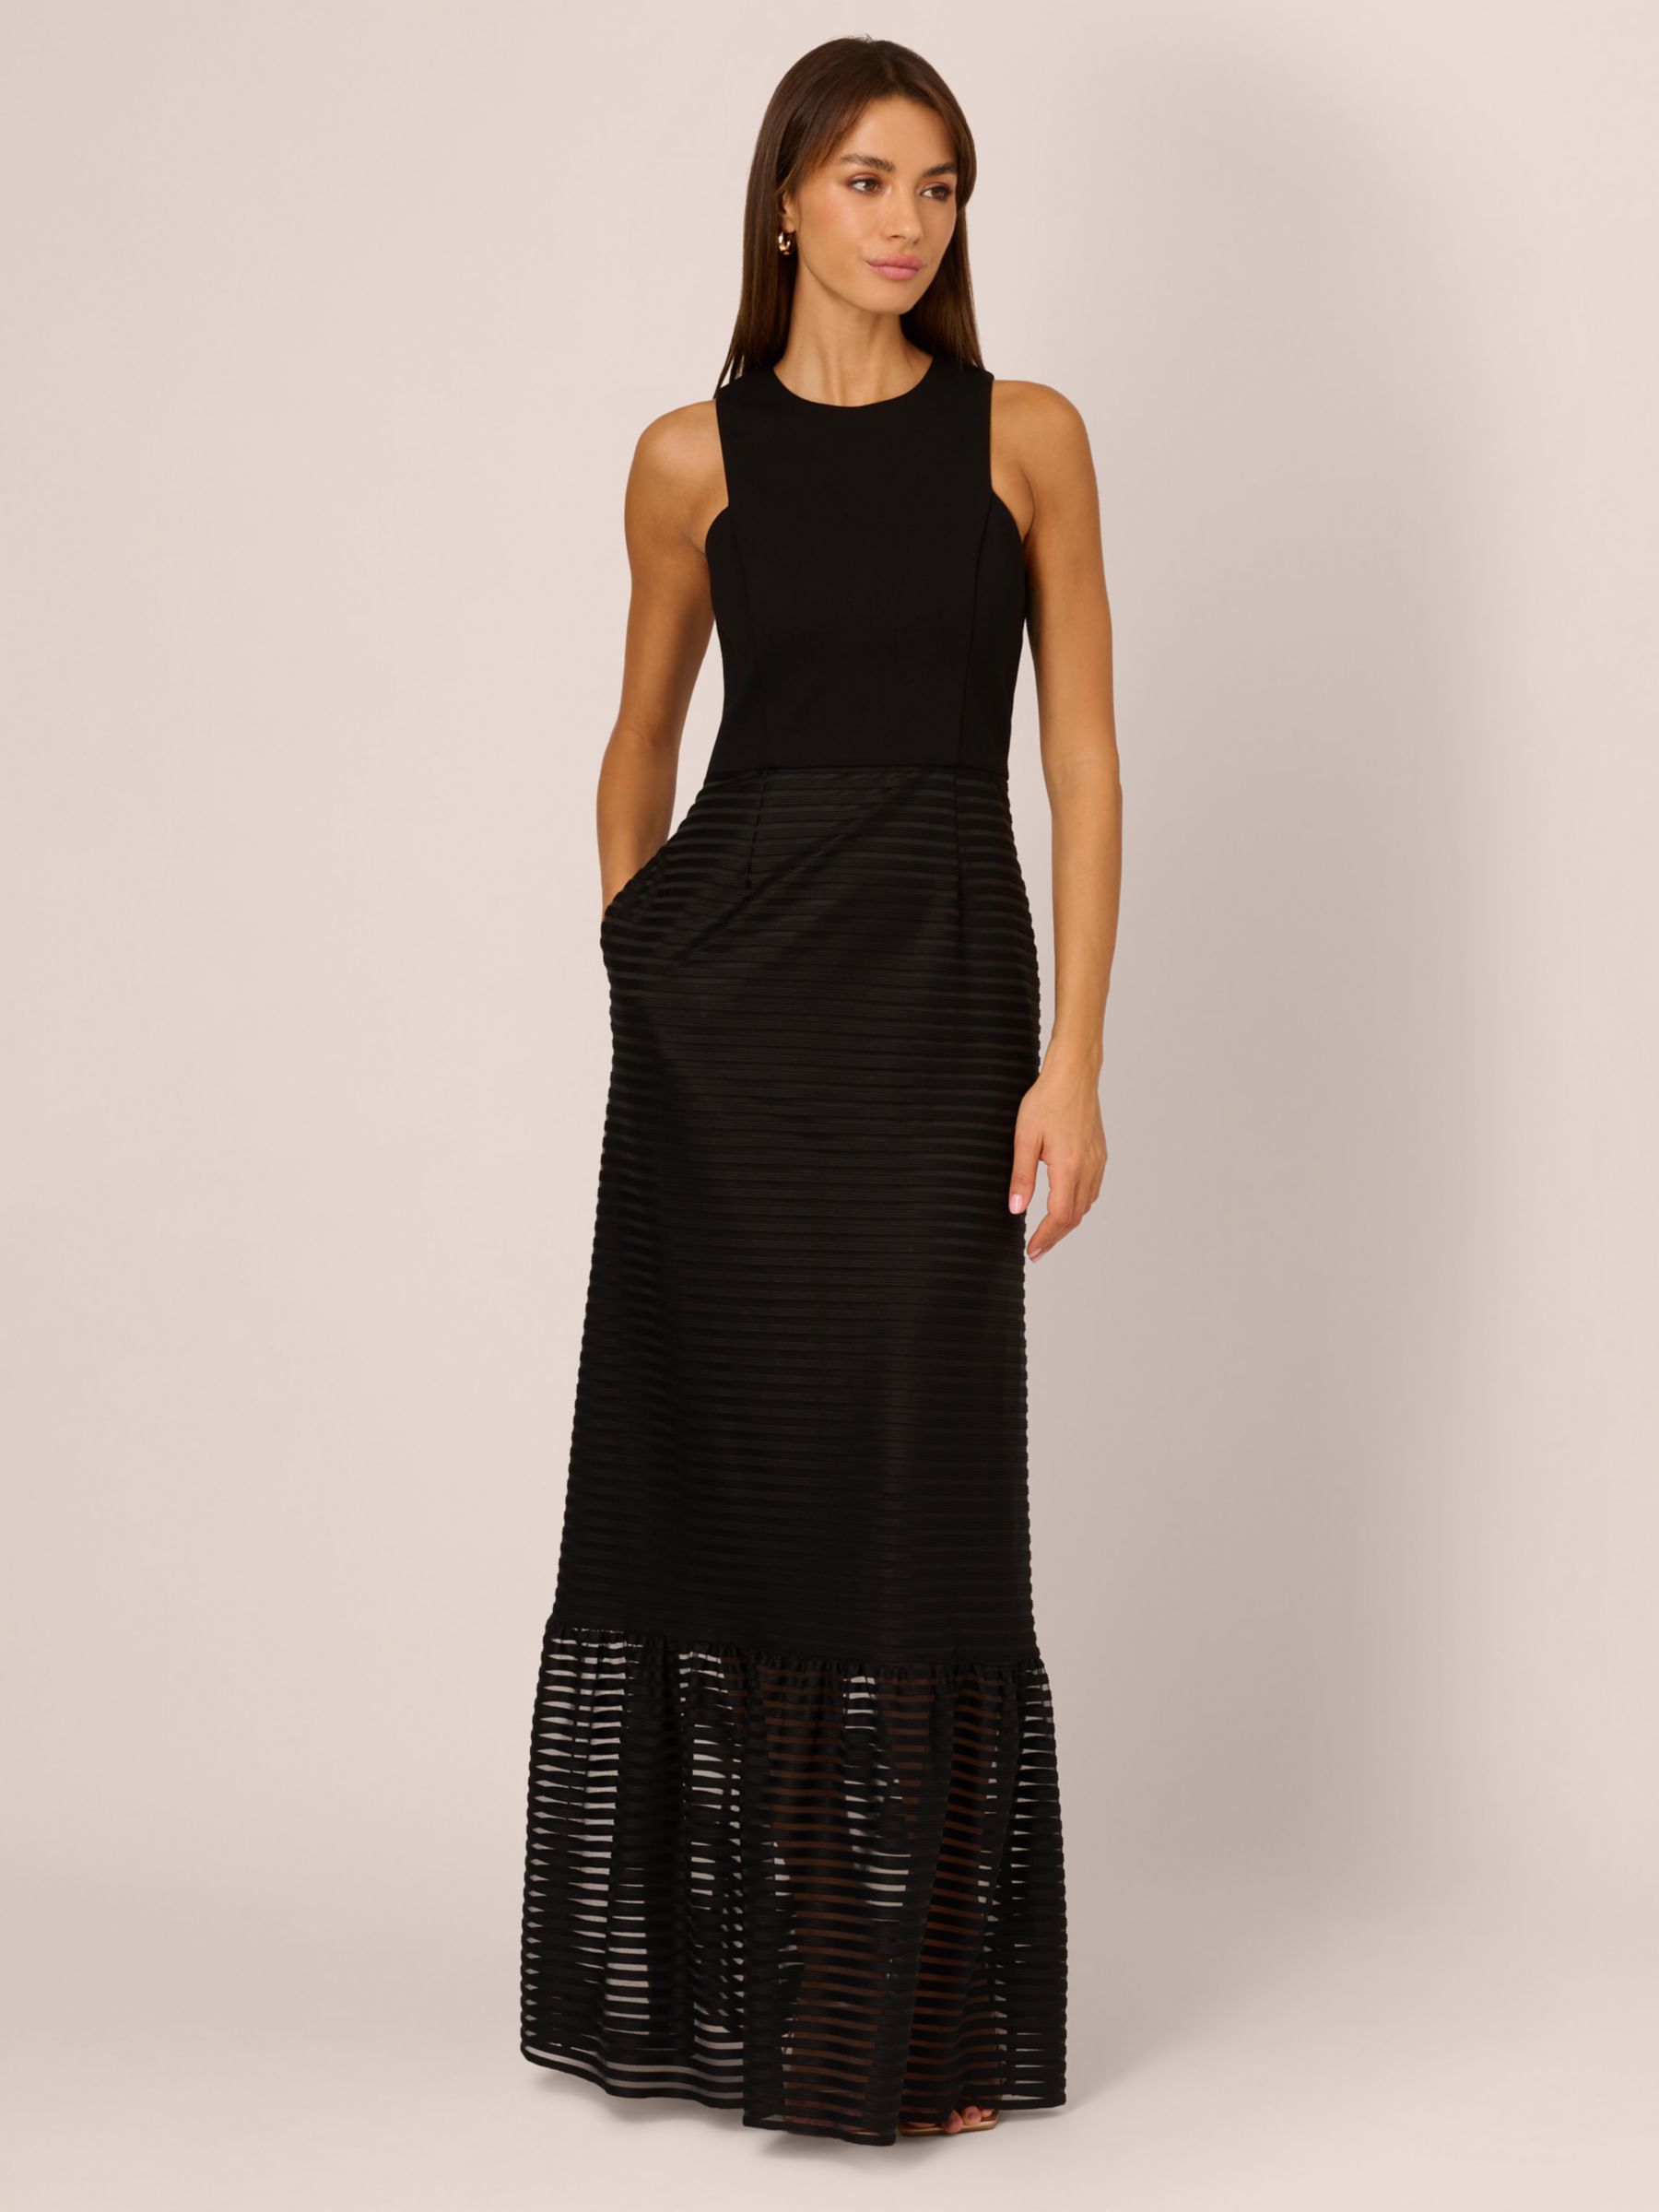 Buy Adrianna by Adrianna Papell Shadow Stripe Maxi Dress, Black Online at johnlewis.com